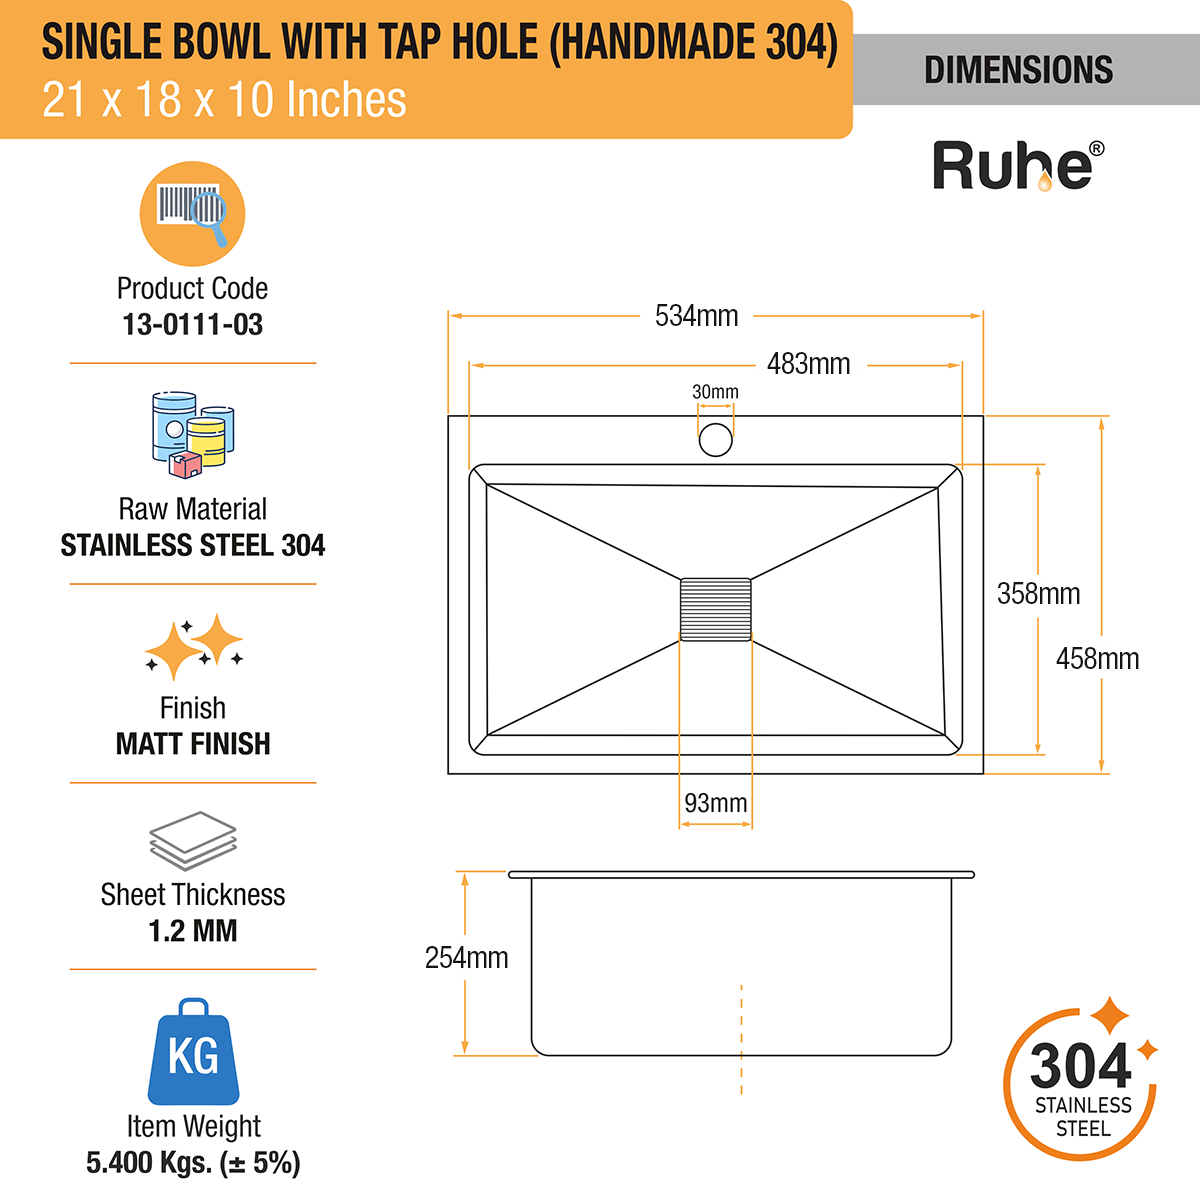 Handmade Single Bowl 304-Grade Kitchen Sink (21 x 18 x 10 Inches) with Tap Hole dimensions and sizes